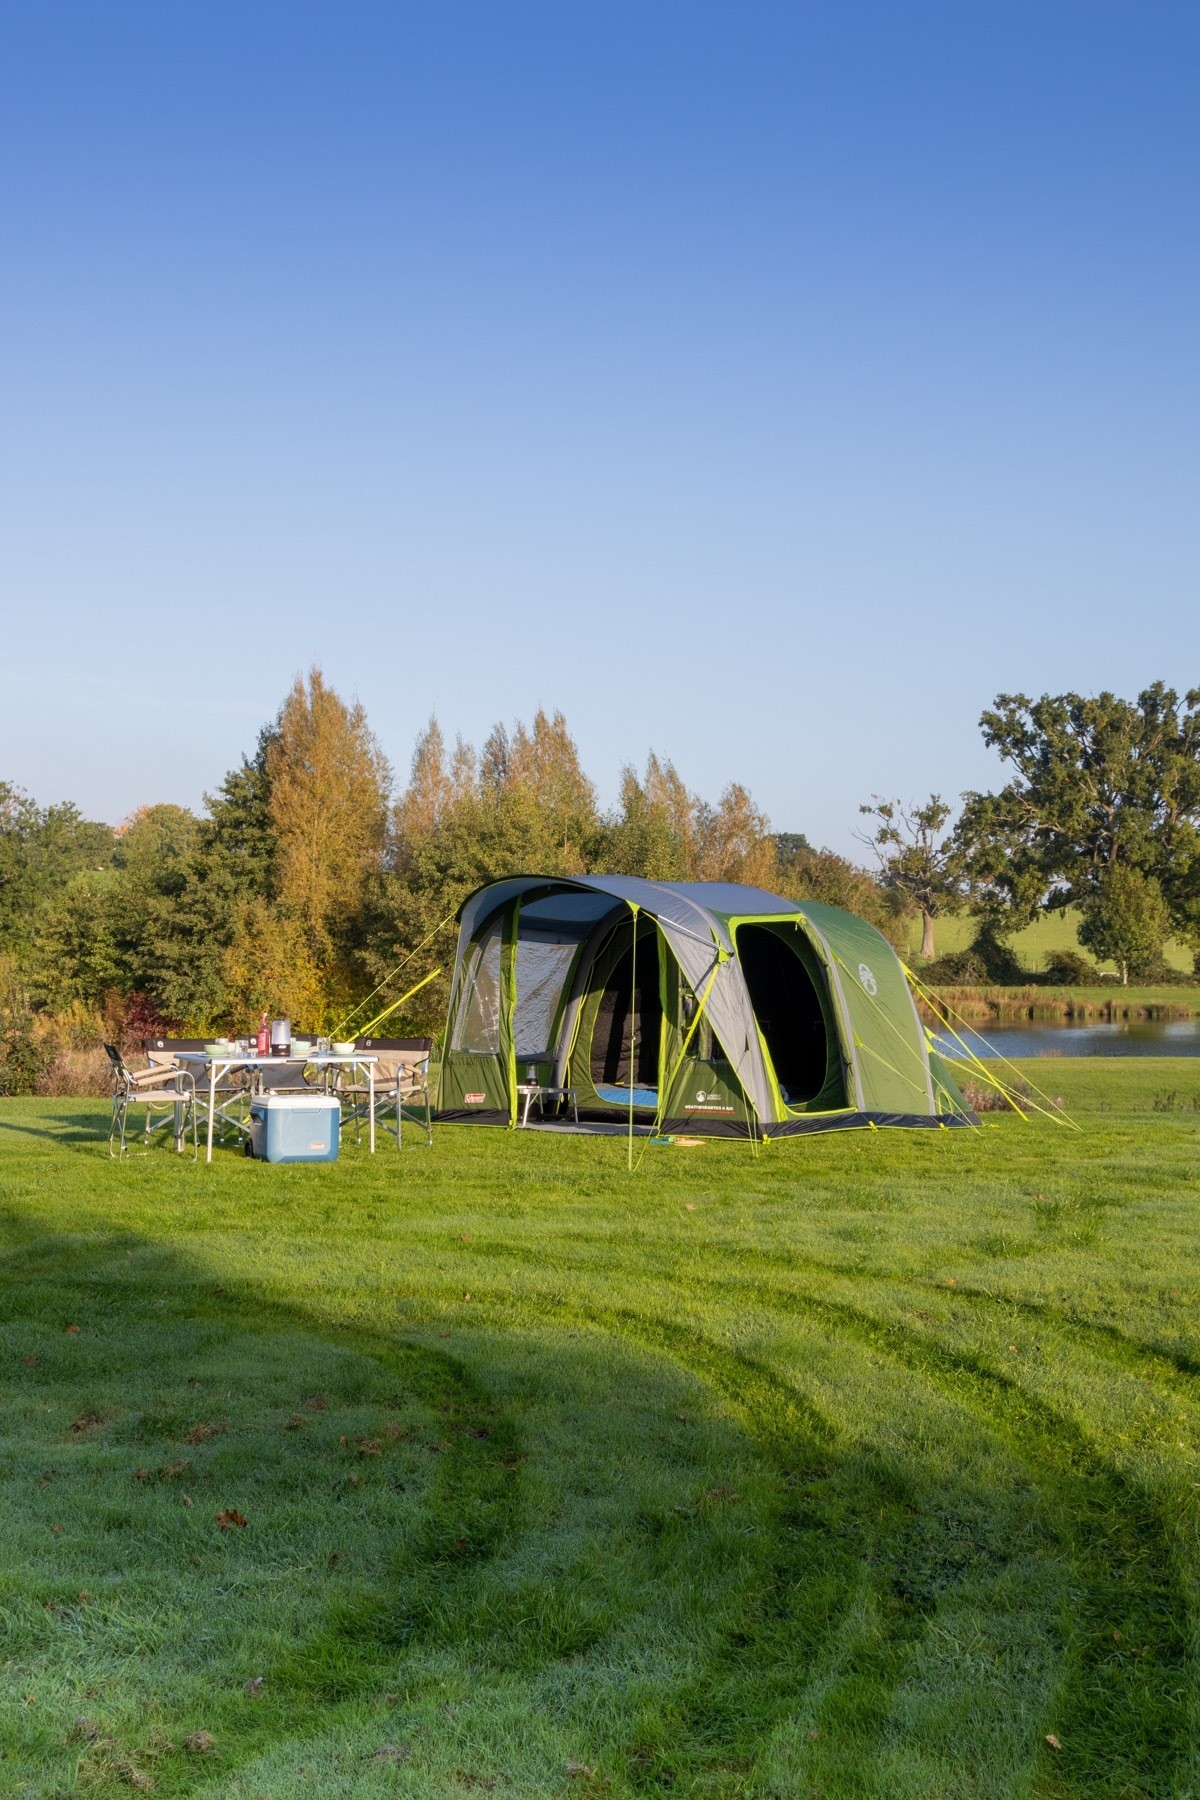 Weathermaster 4 Air - tent pitched